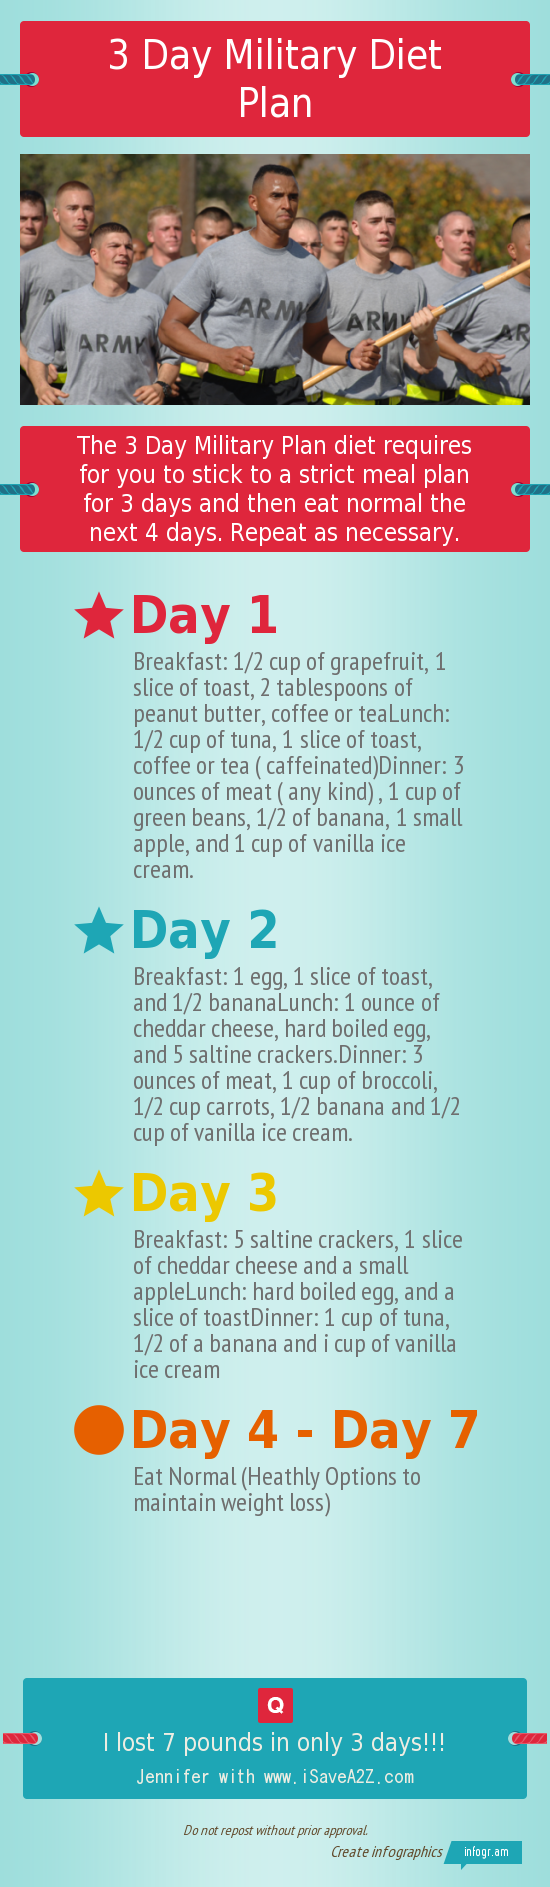 3 Day Military Diet Plan